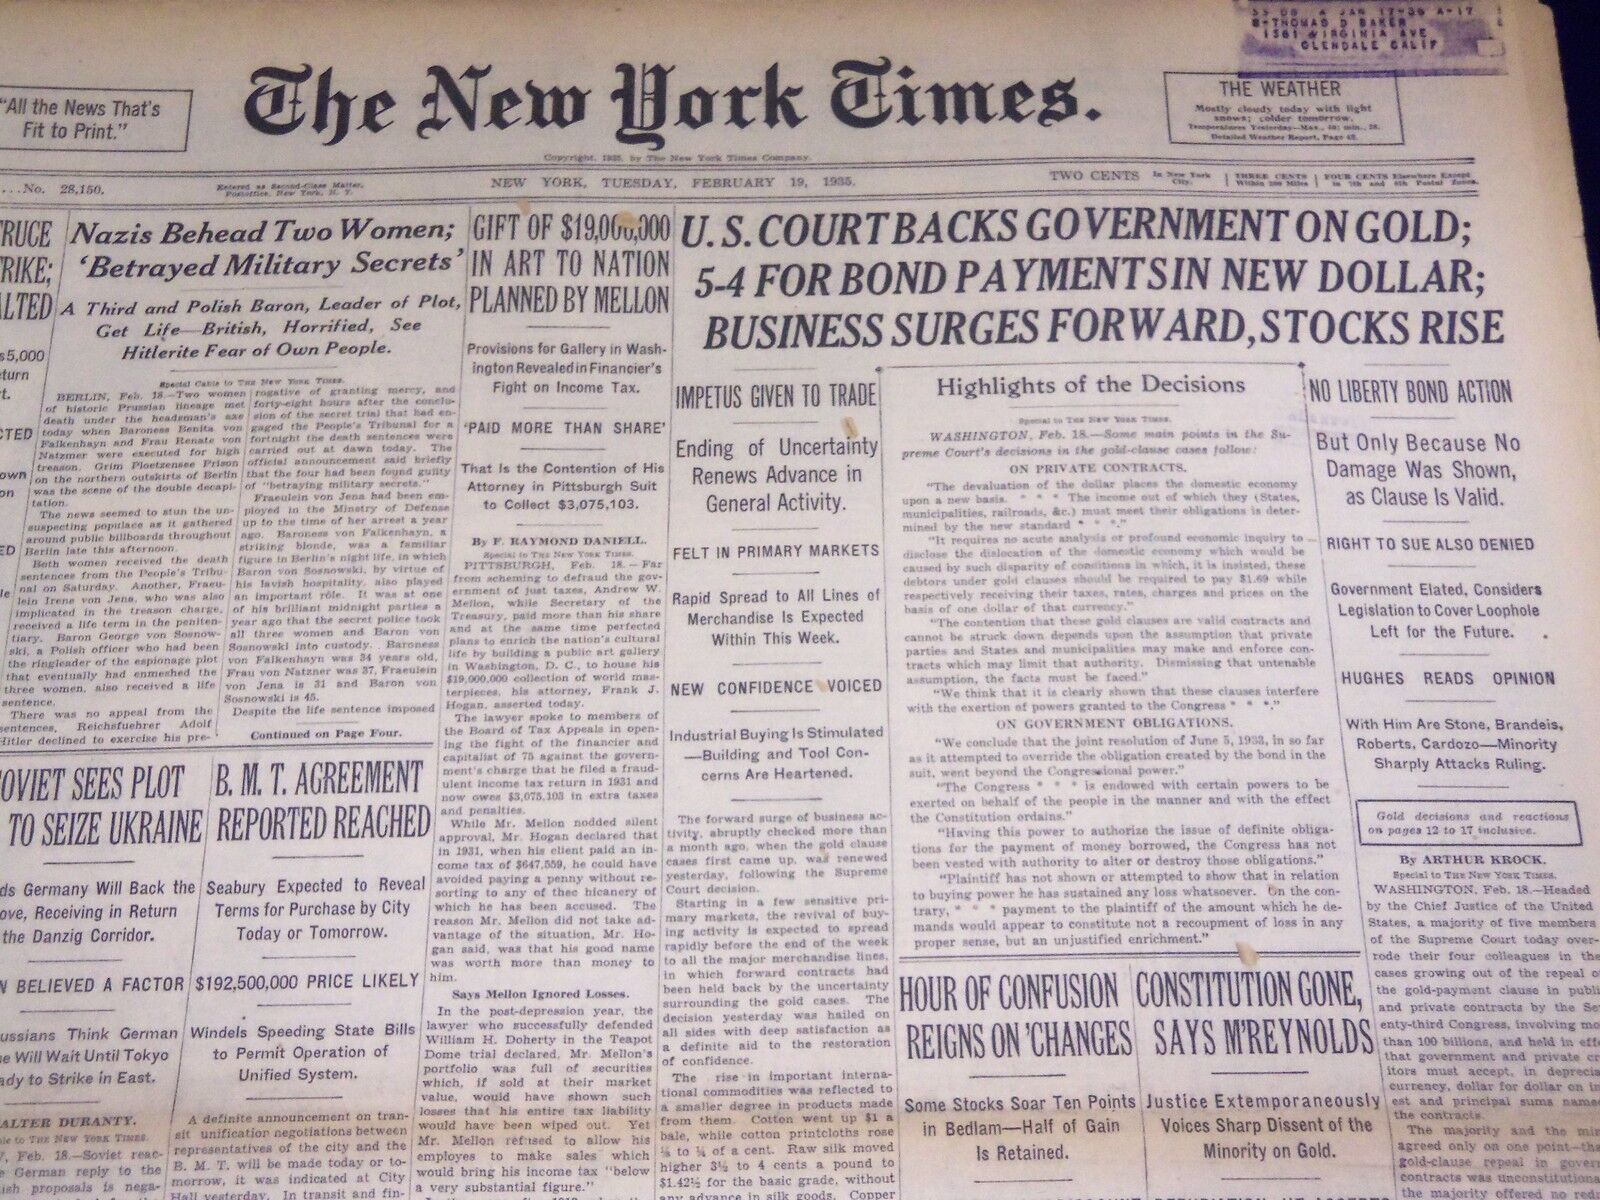 1935 FEB 19 NEW YORK TIMES - U. S. COURT BACKS GOVERNMENT ON GOLD - NT 1958